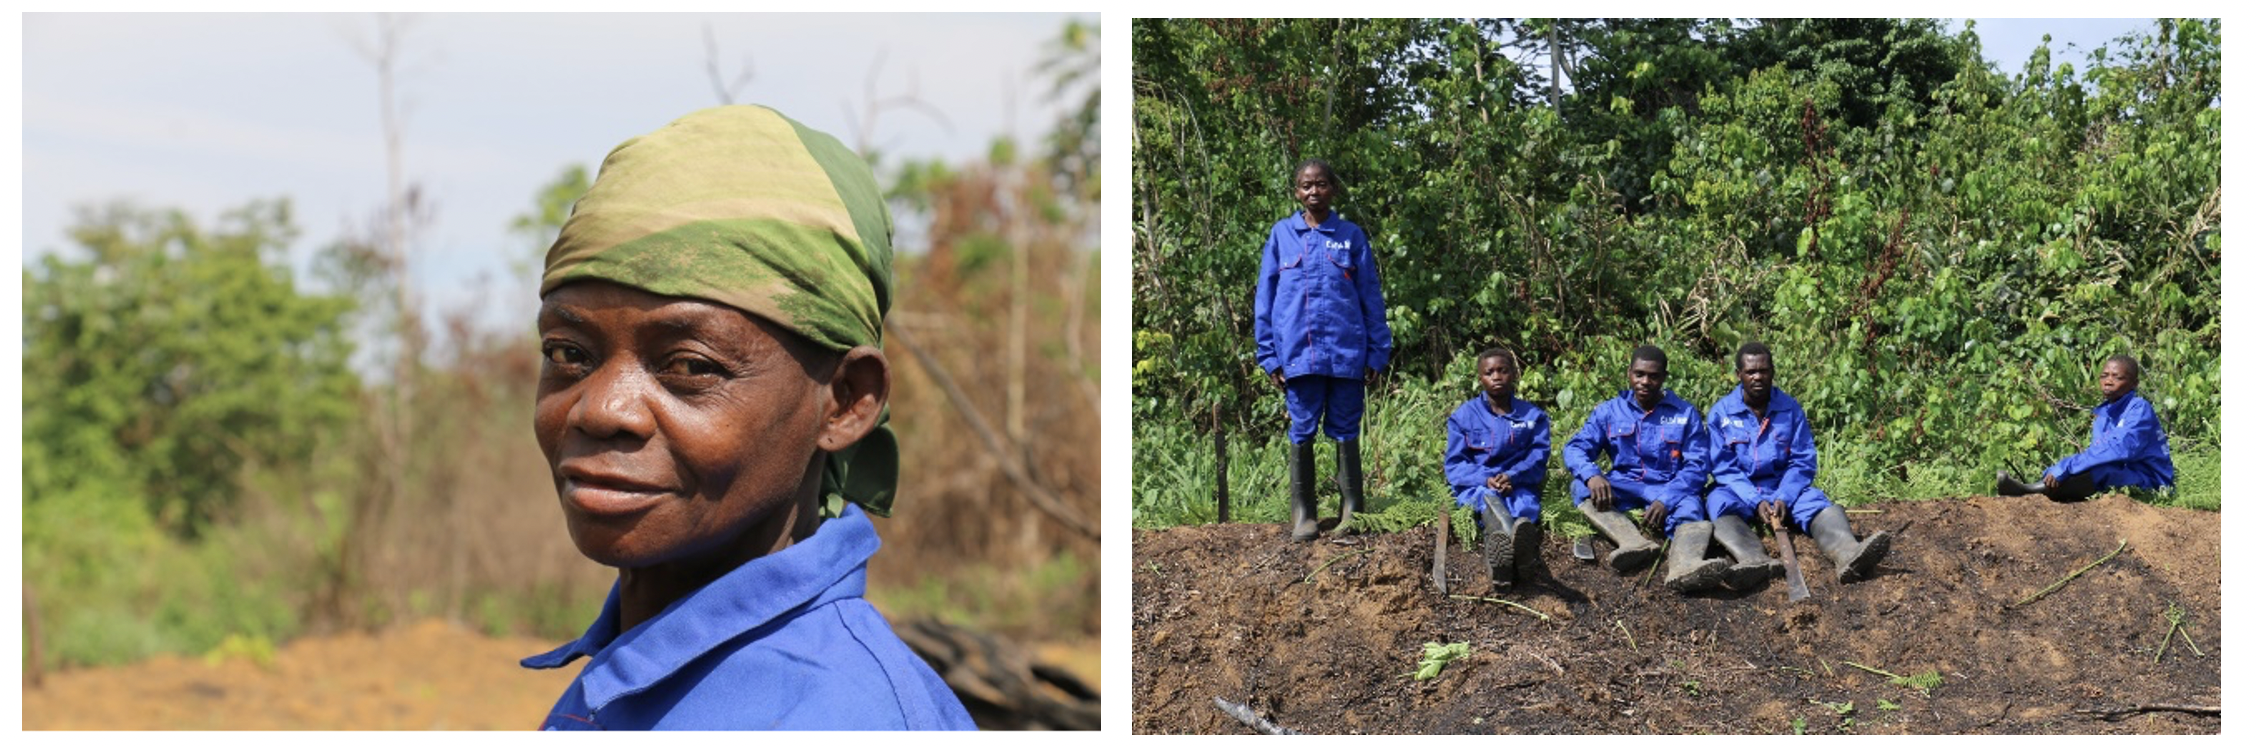 Photos: Germaine Pembe, indigenous woman, president of a farming group in Mikamba, growing cassava and groundnuts, composed of vulnerable indigenous and Bantu people. WFP/Cécile Mercier